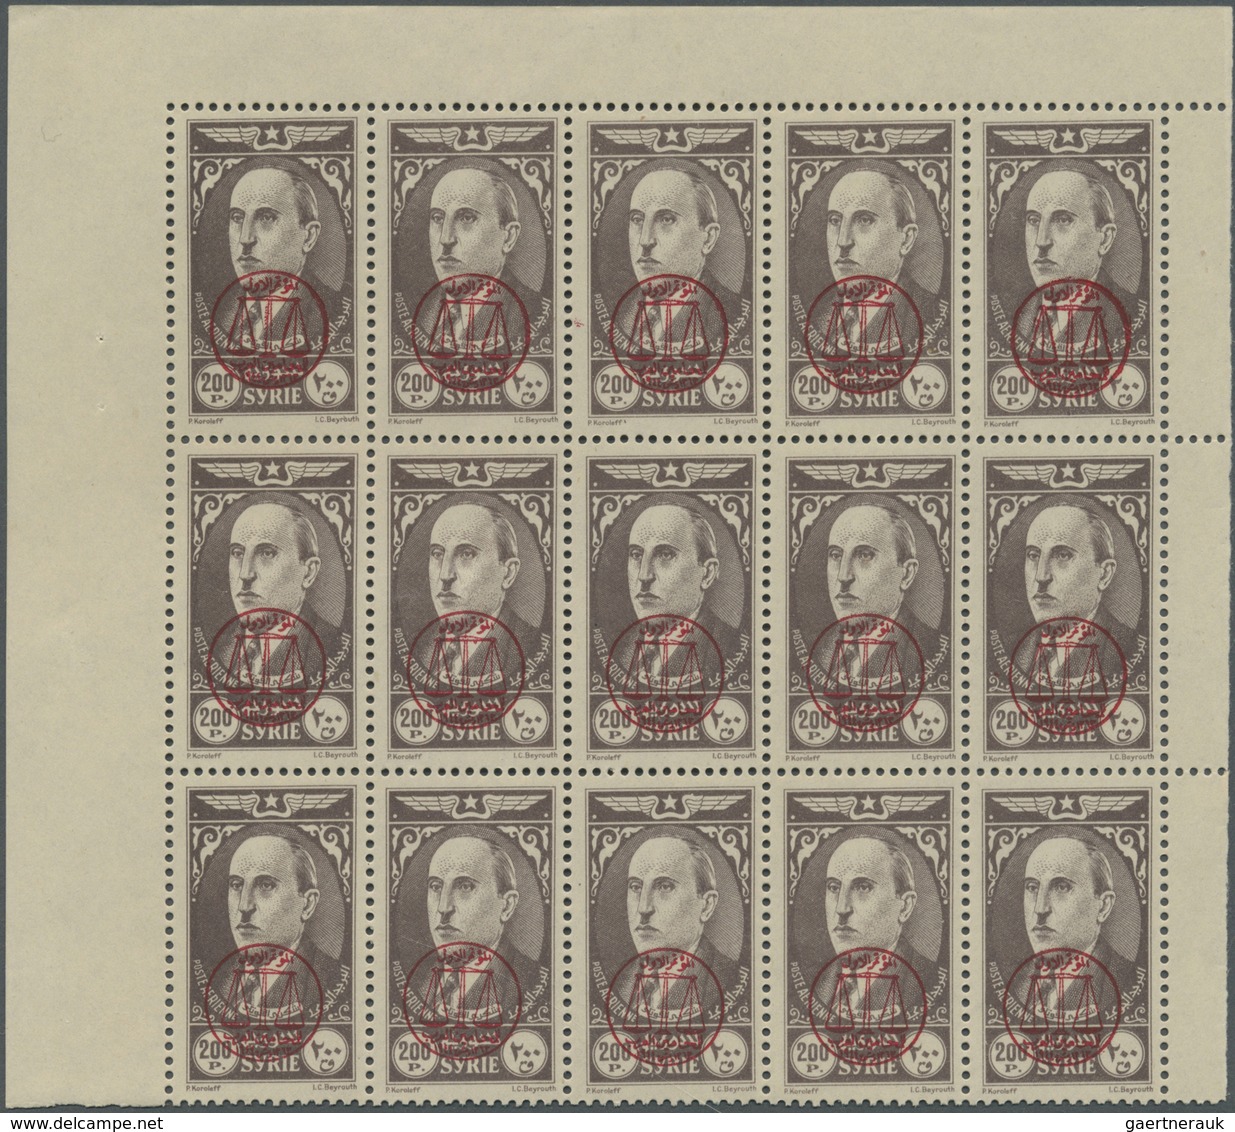 ** Syrien: 1944, Law Congress Complete Set In Blocks Of 15, Mint Never Hinged, Michel Catalogue Value 5 - Syrië